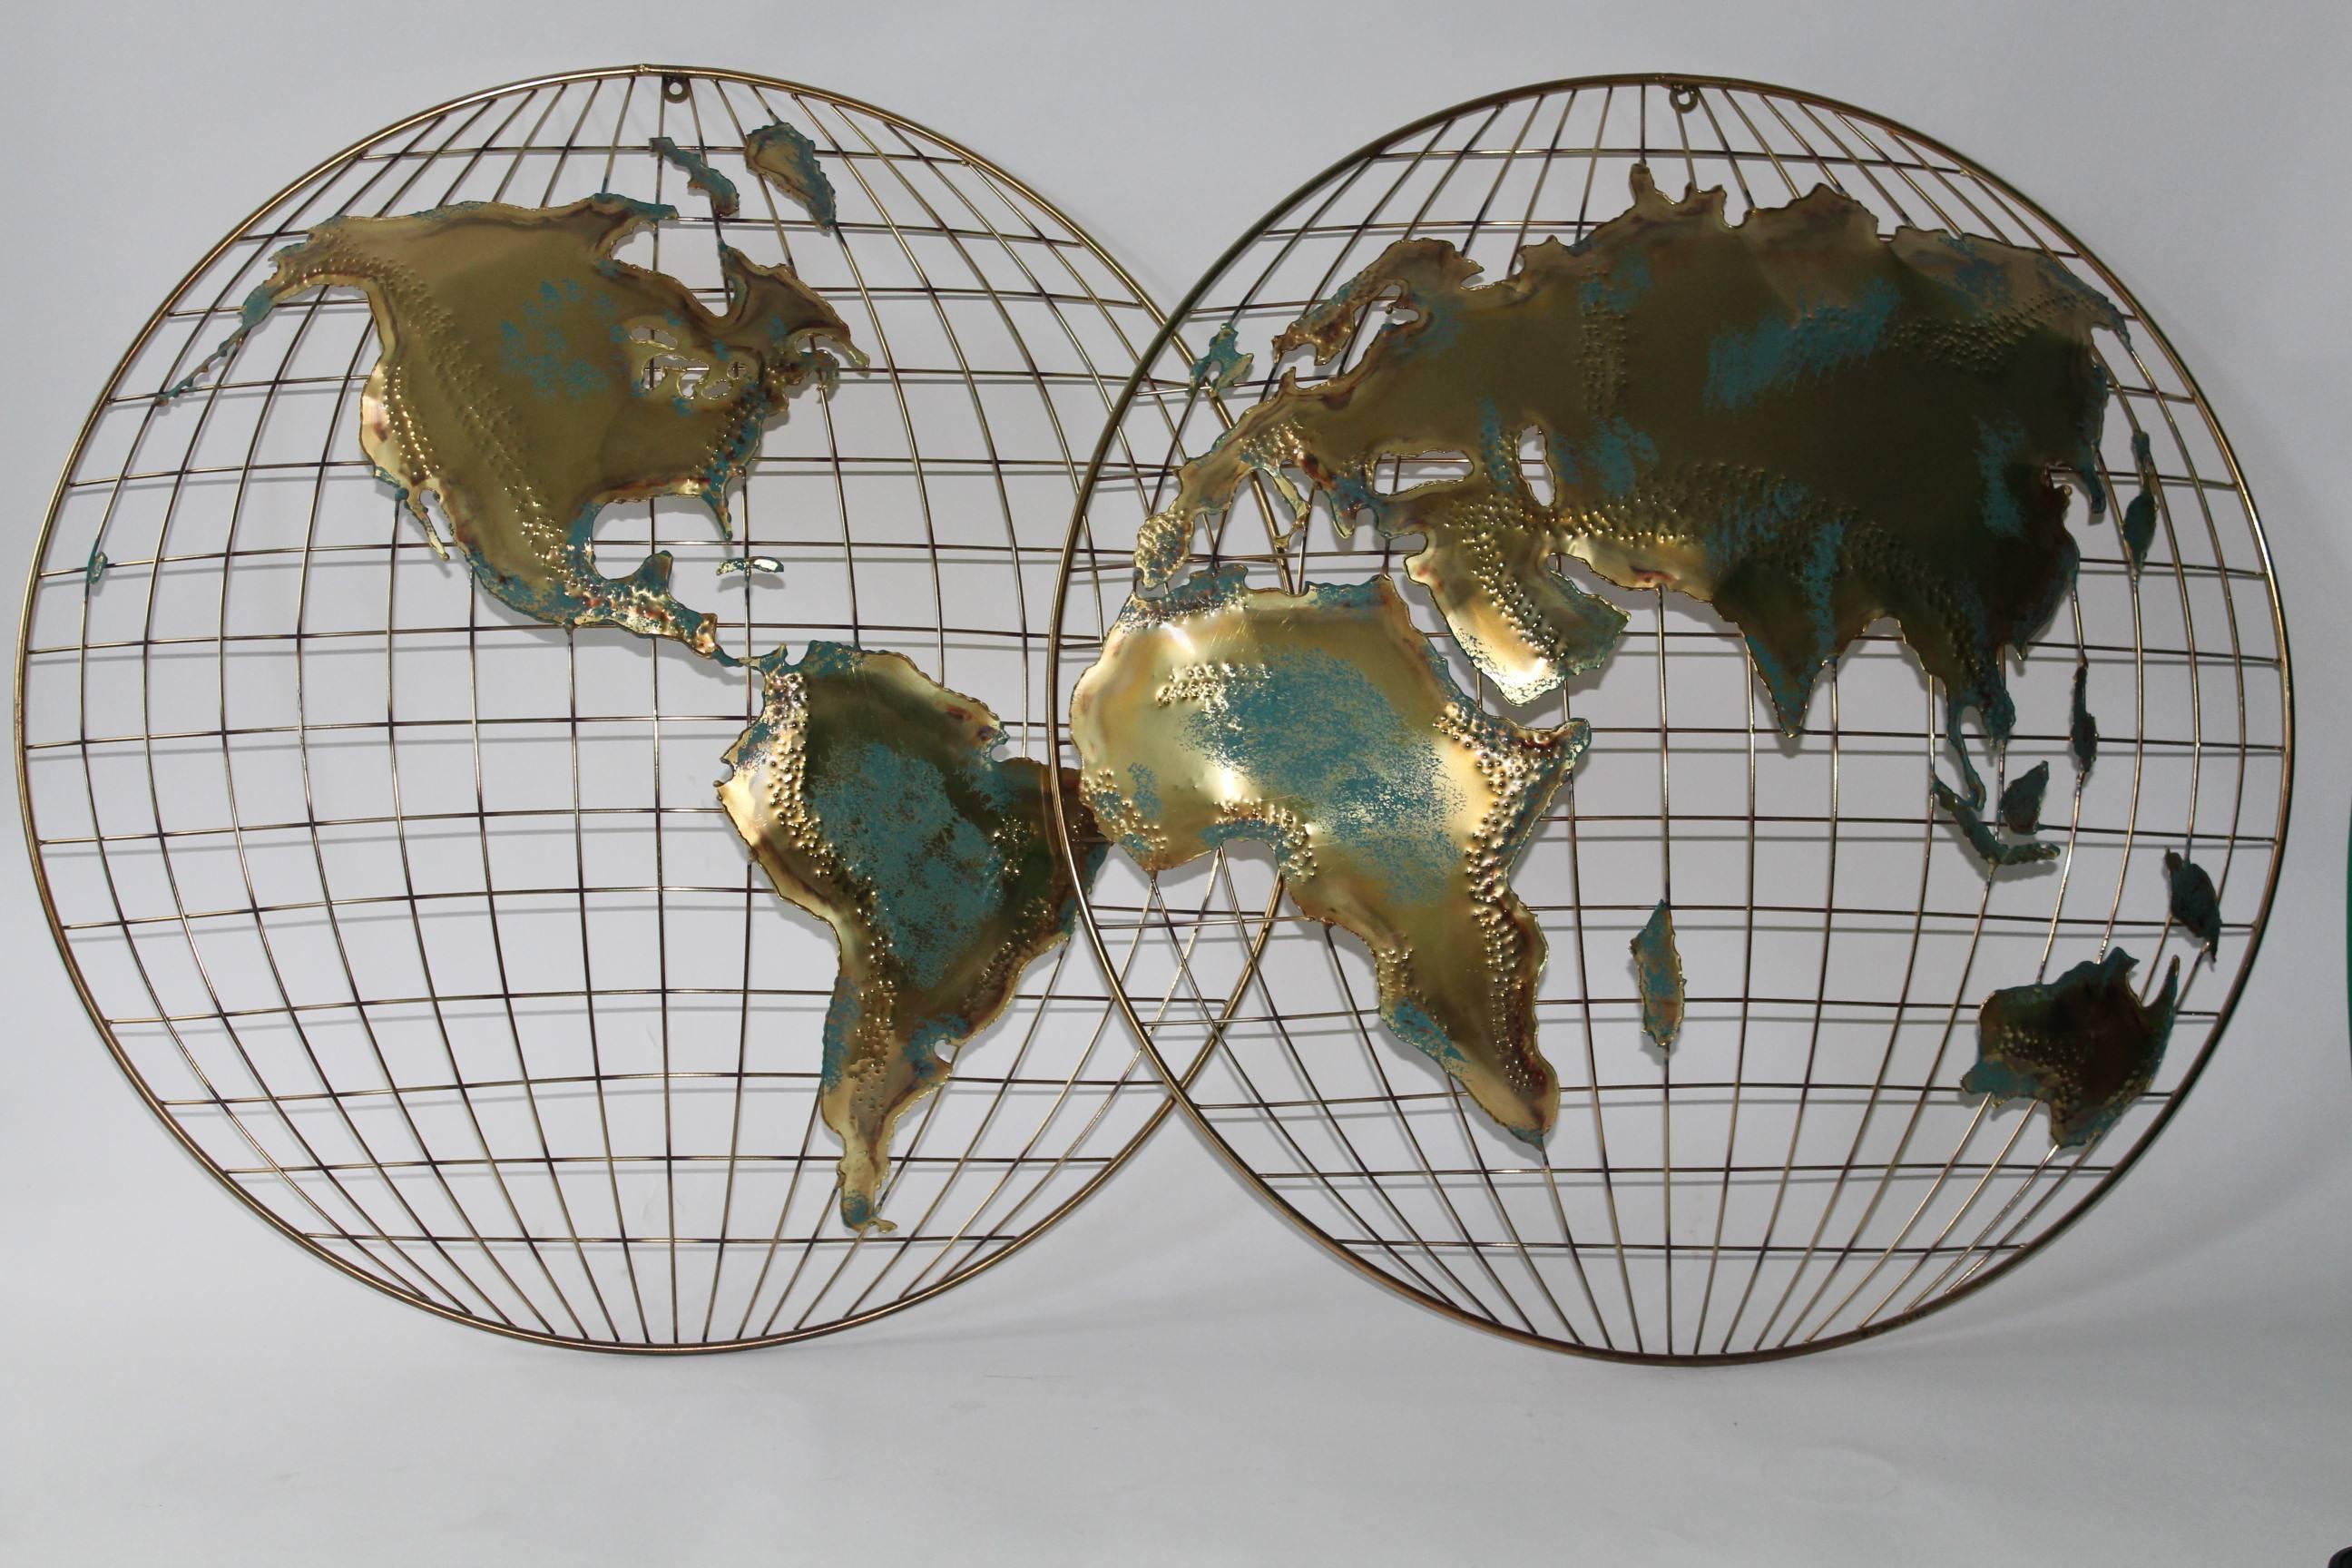 Signed pair of Brutalist manner wall mount world maps by Curtis Jere, dated 1982, crafted of torch cut and soldered mixed-metal with verdigris patina, each depicting opposite sides of the earth. Very good condition.

11095